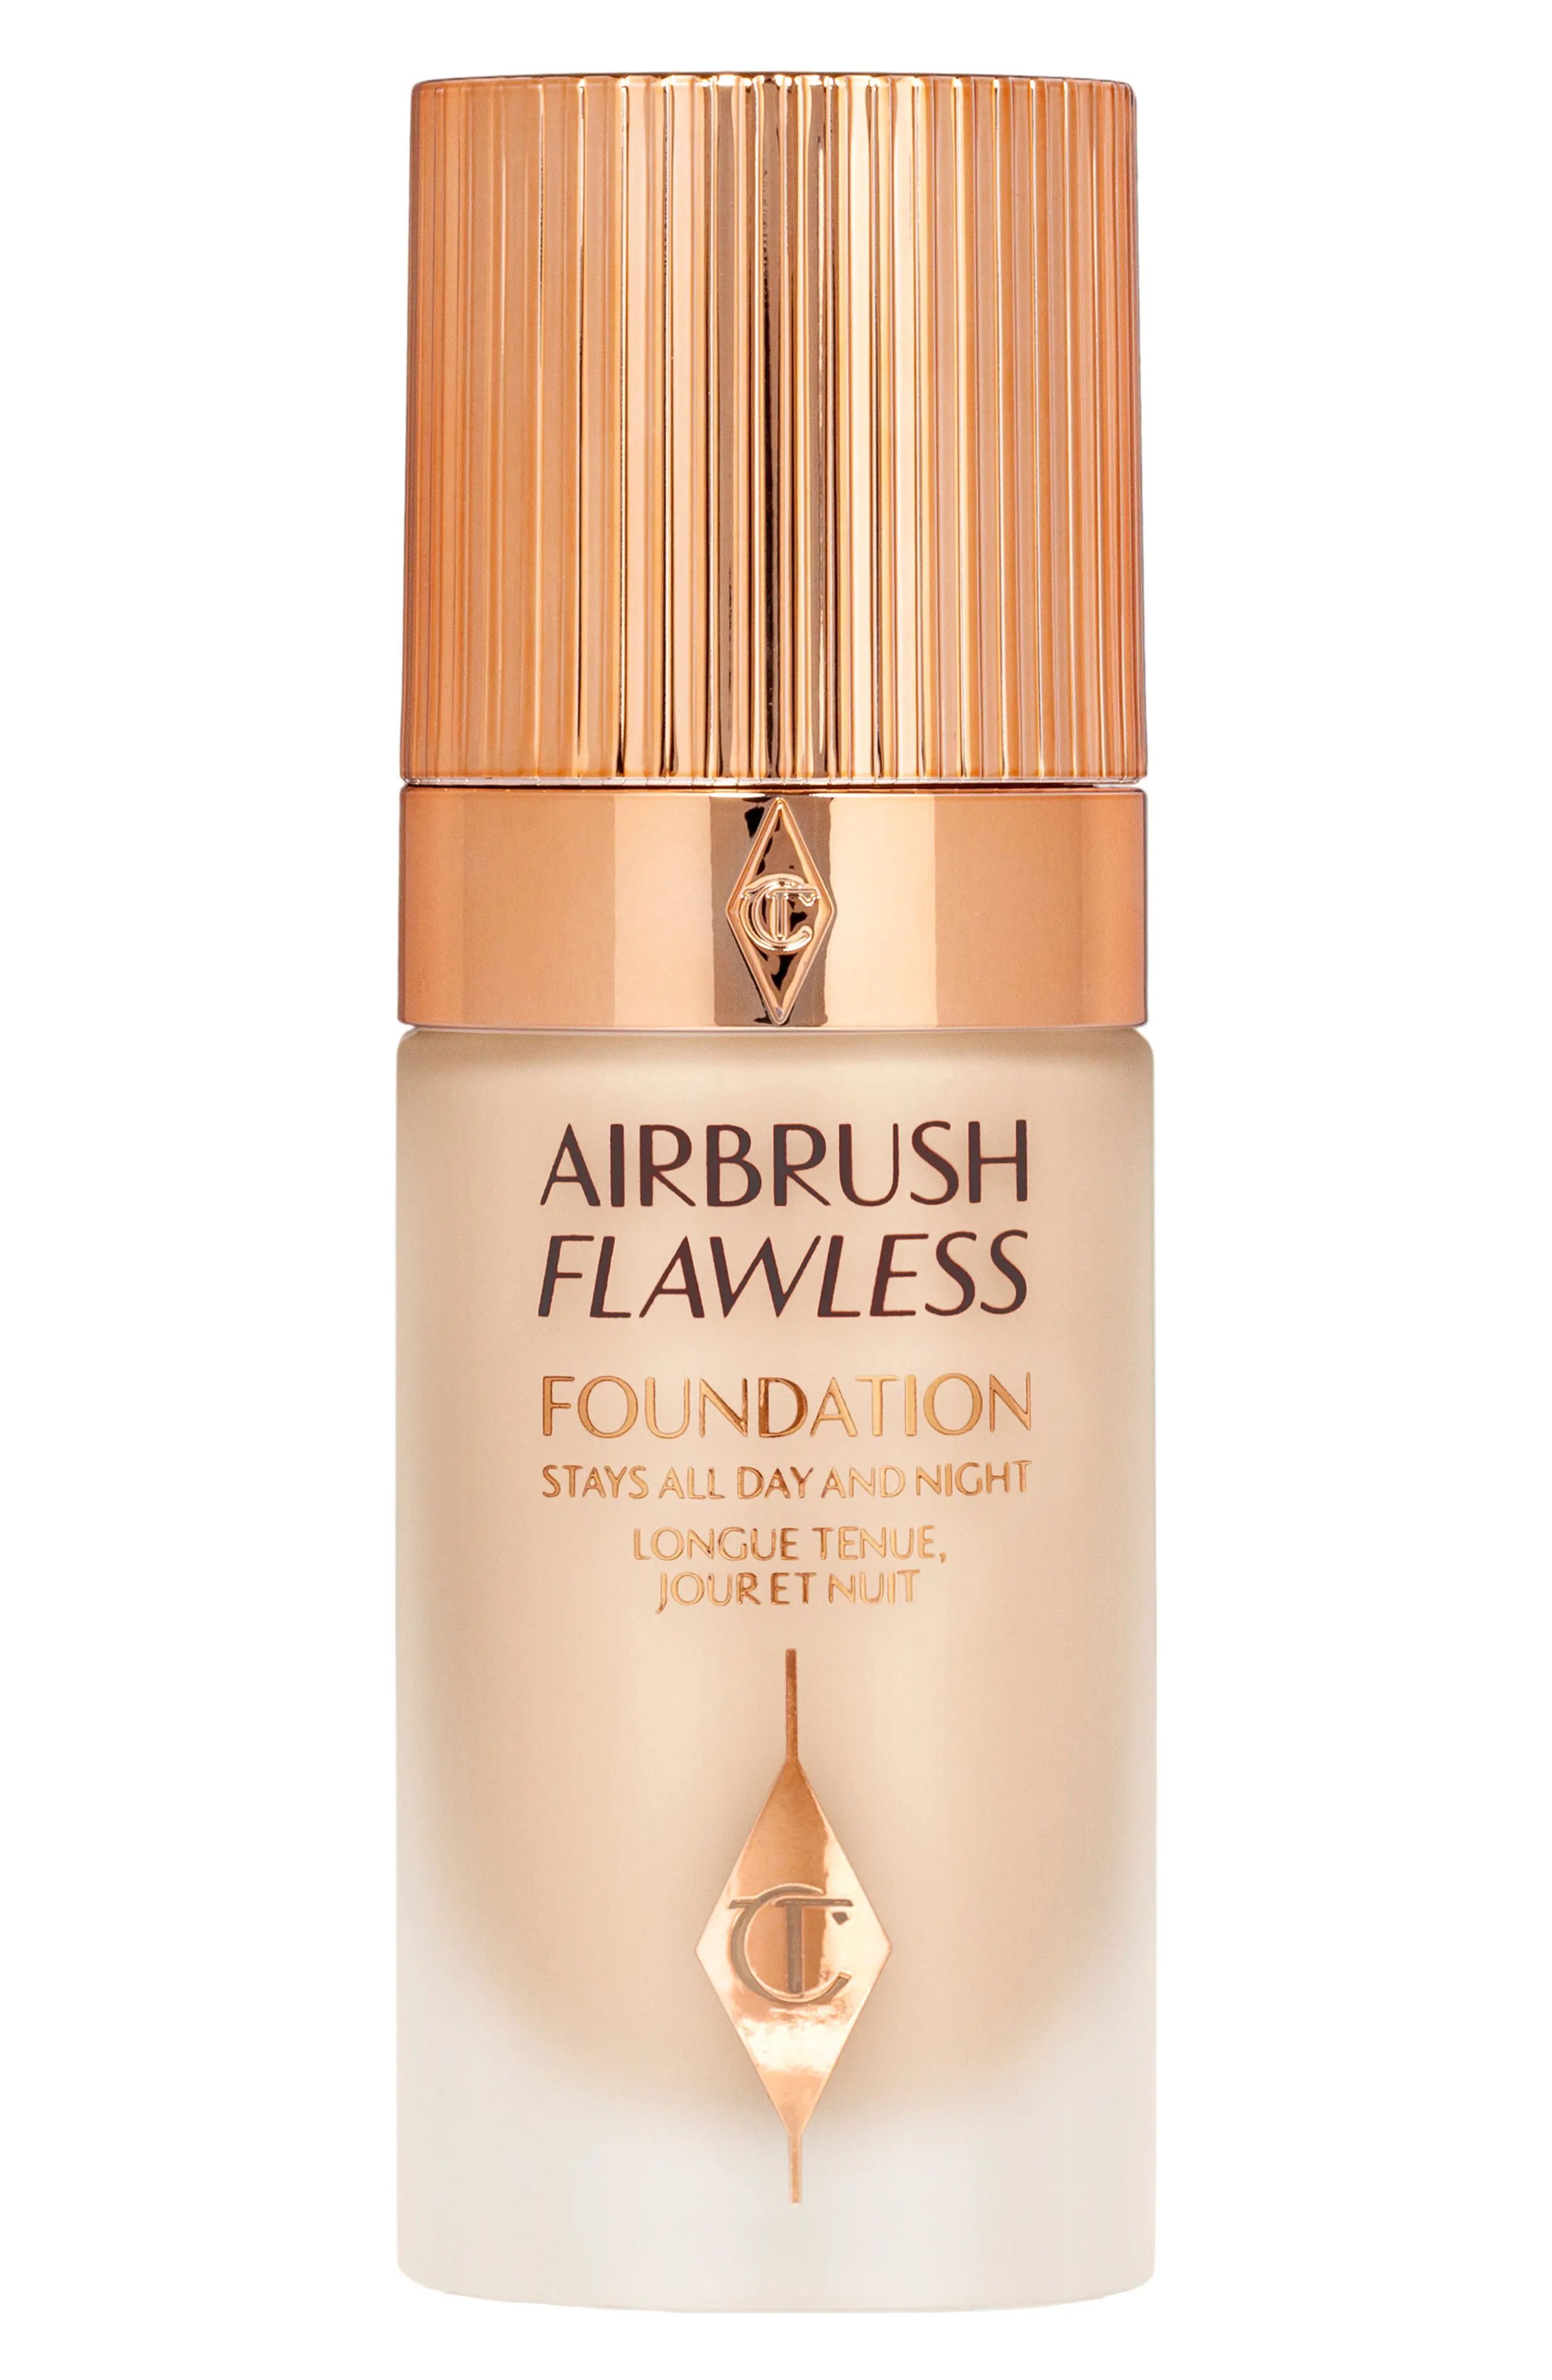 Charlotte Tilbury Airbrush Flawless Foundation in 03 Cool at Nordstrom | Nordstrom